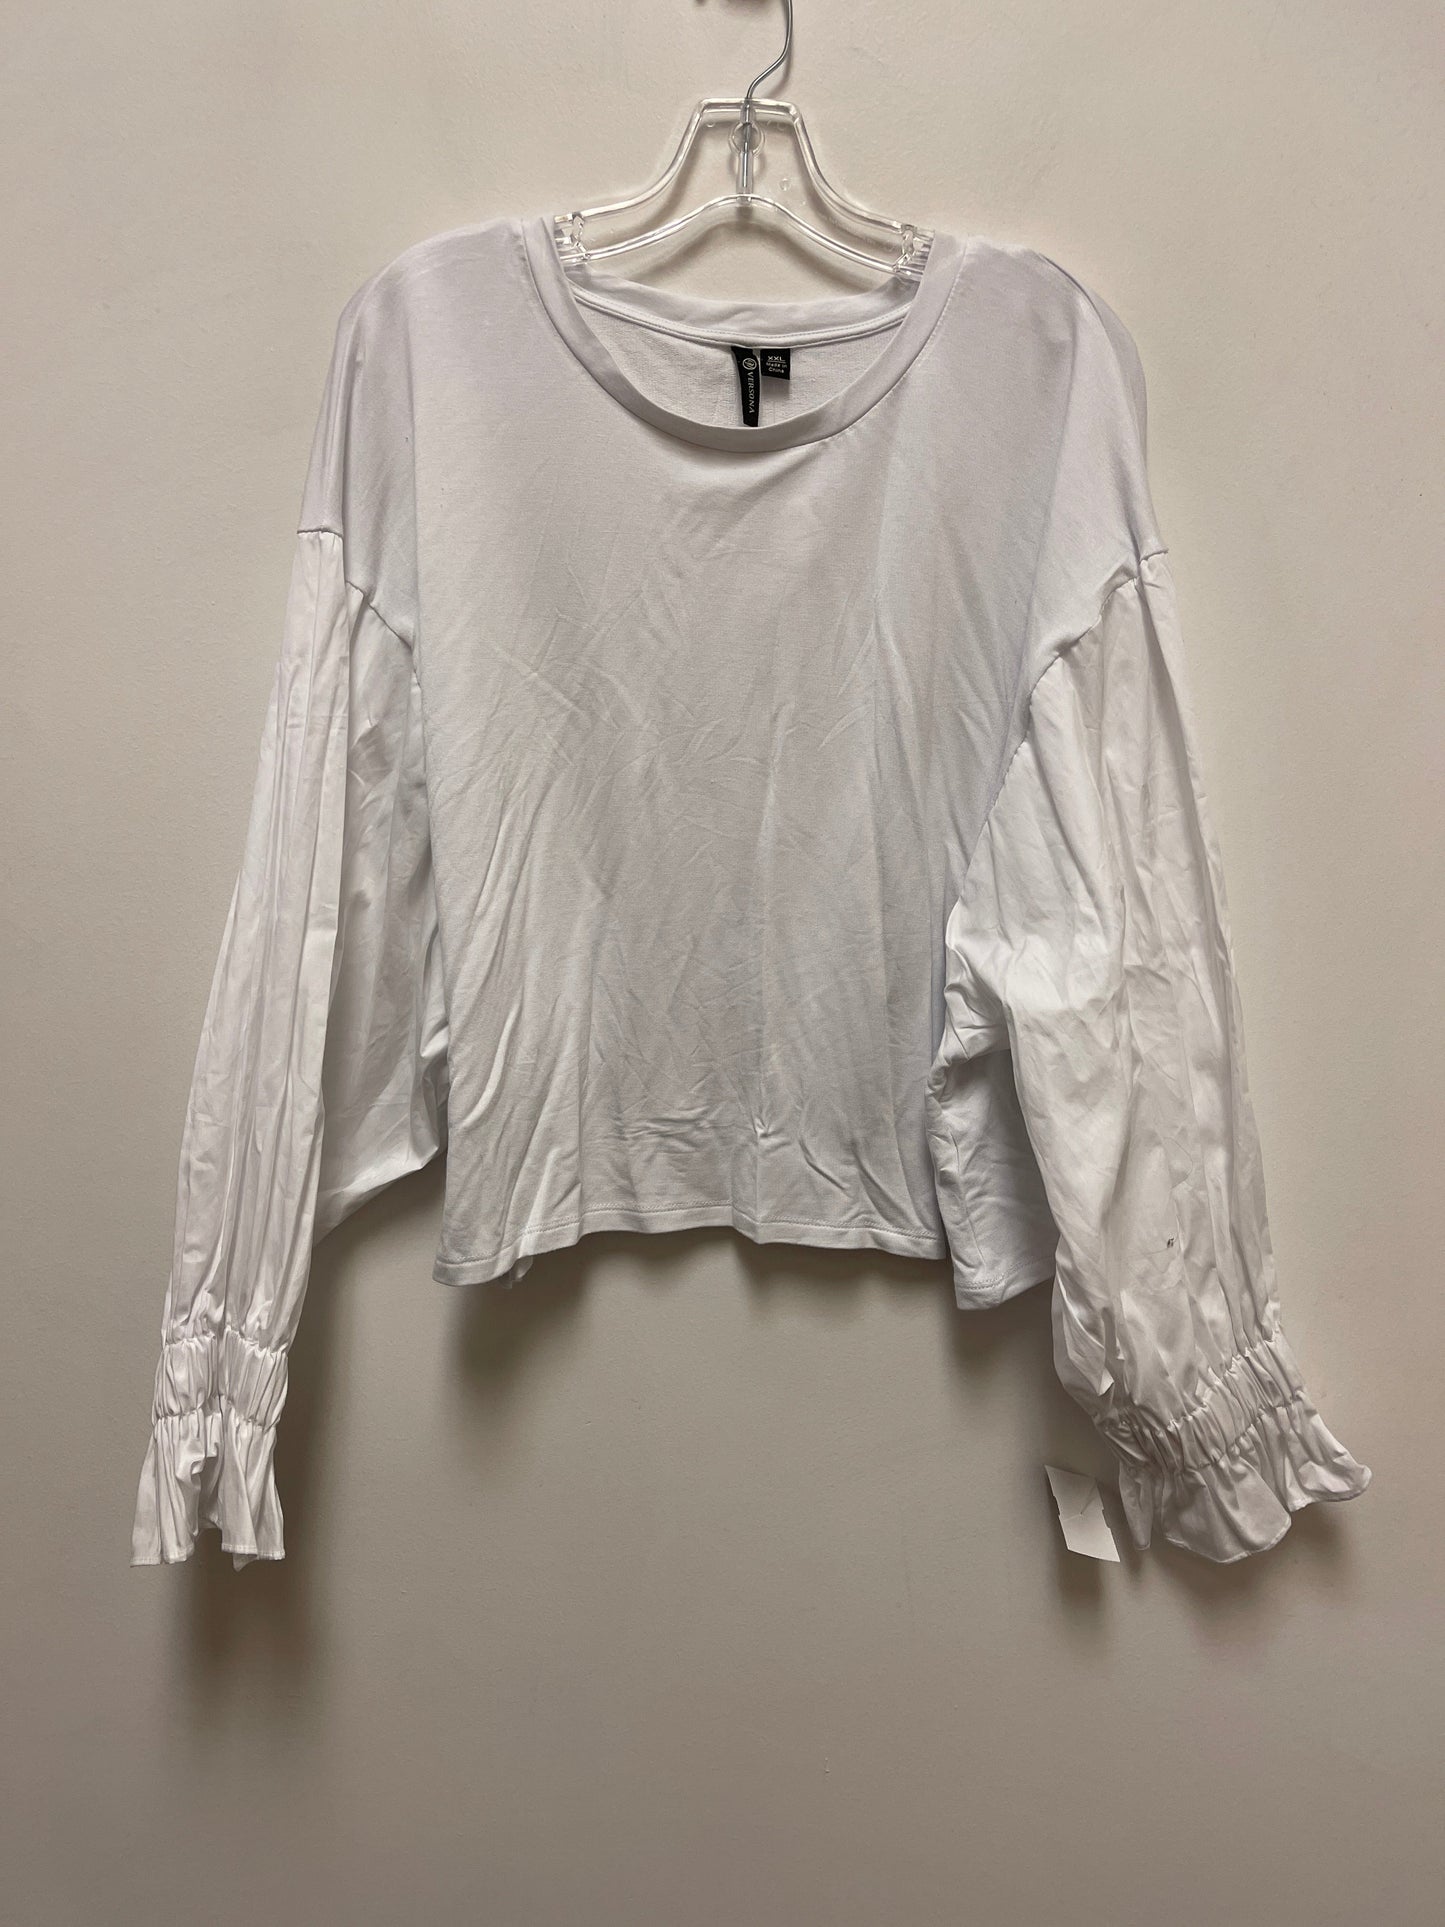 White Top Long Sleeve Versona, Size 2x